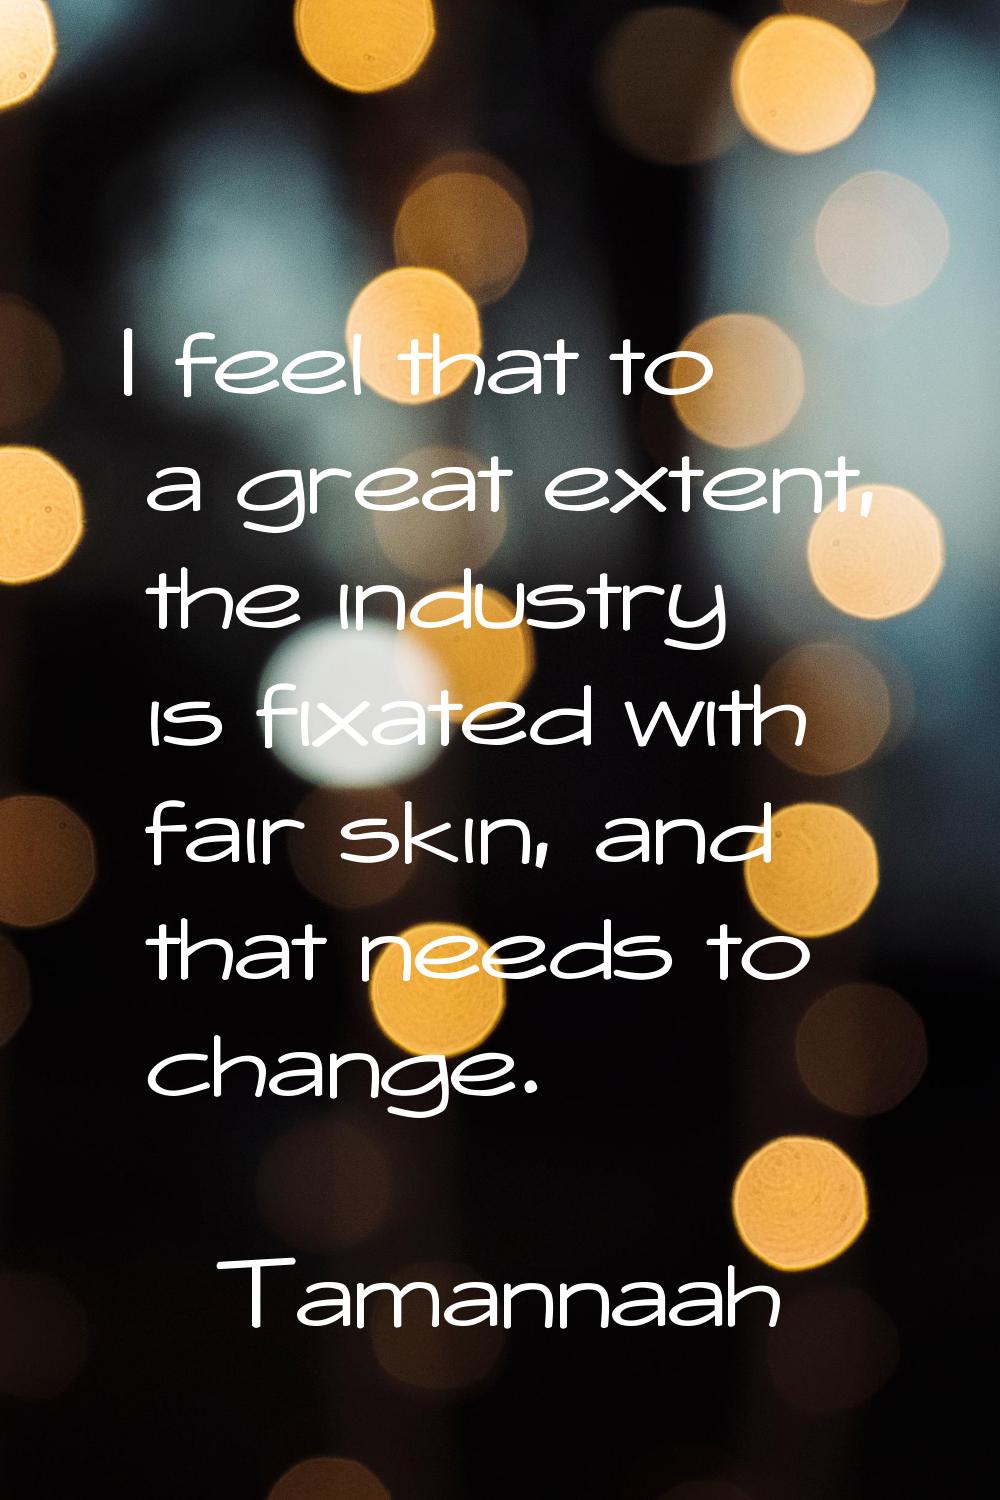 I feel that to a great extent, the industry is fixated with fair skin, and that needs to change.